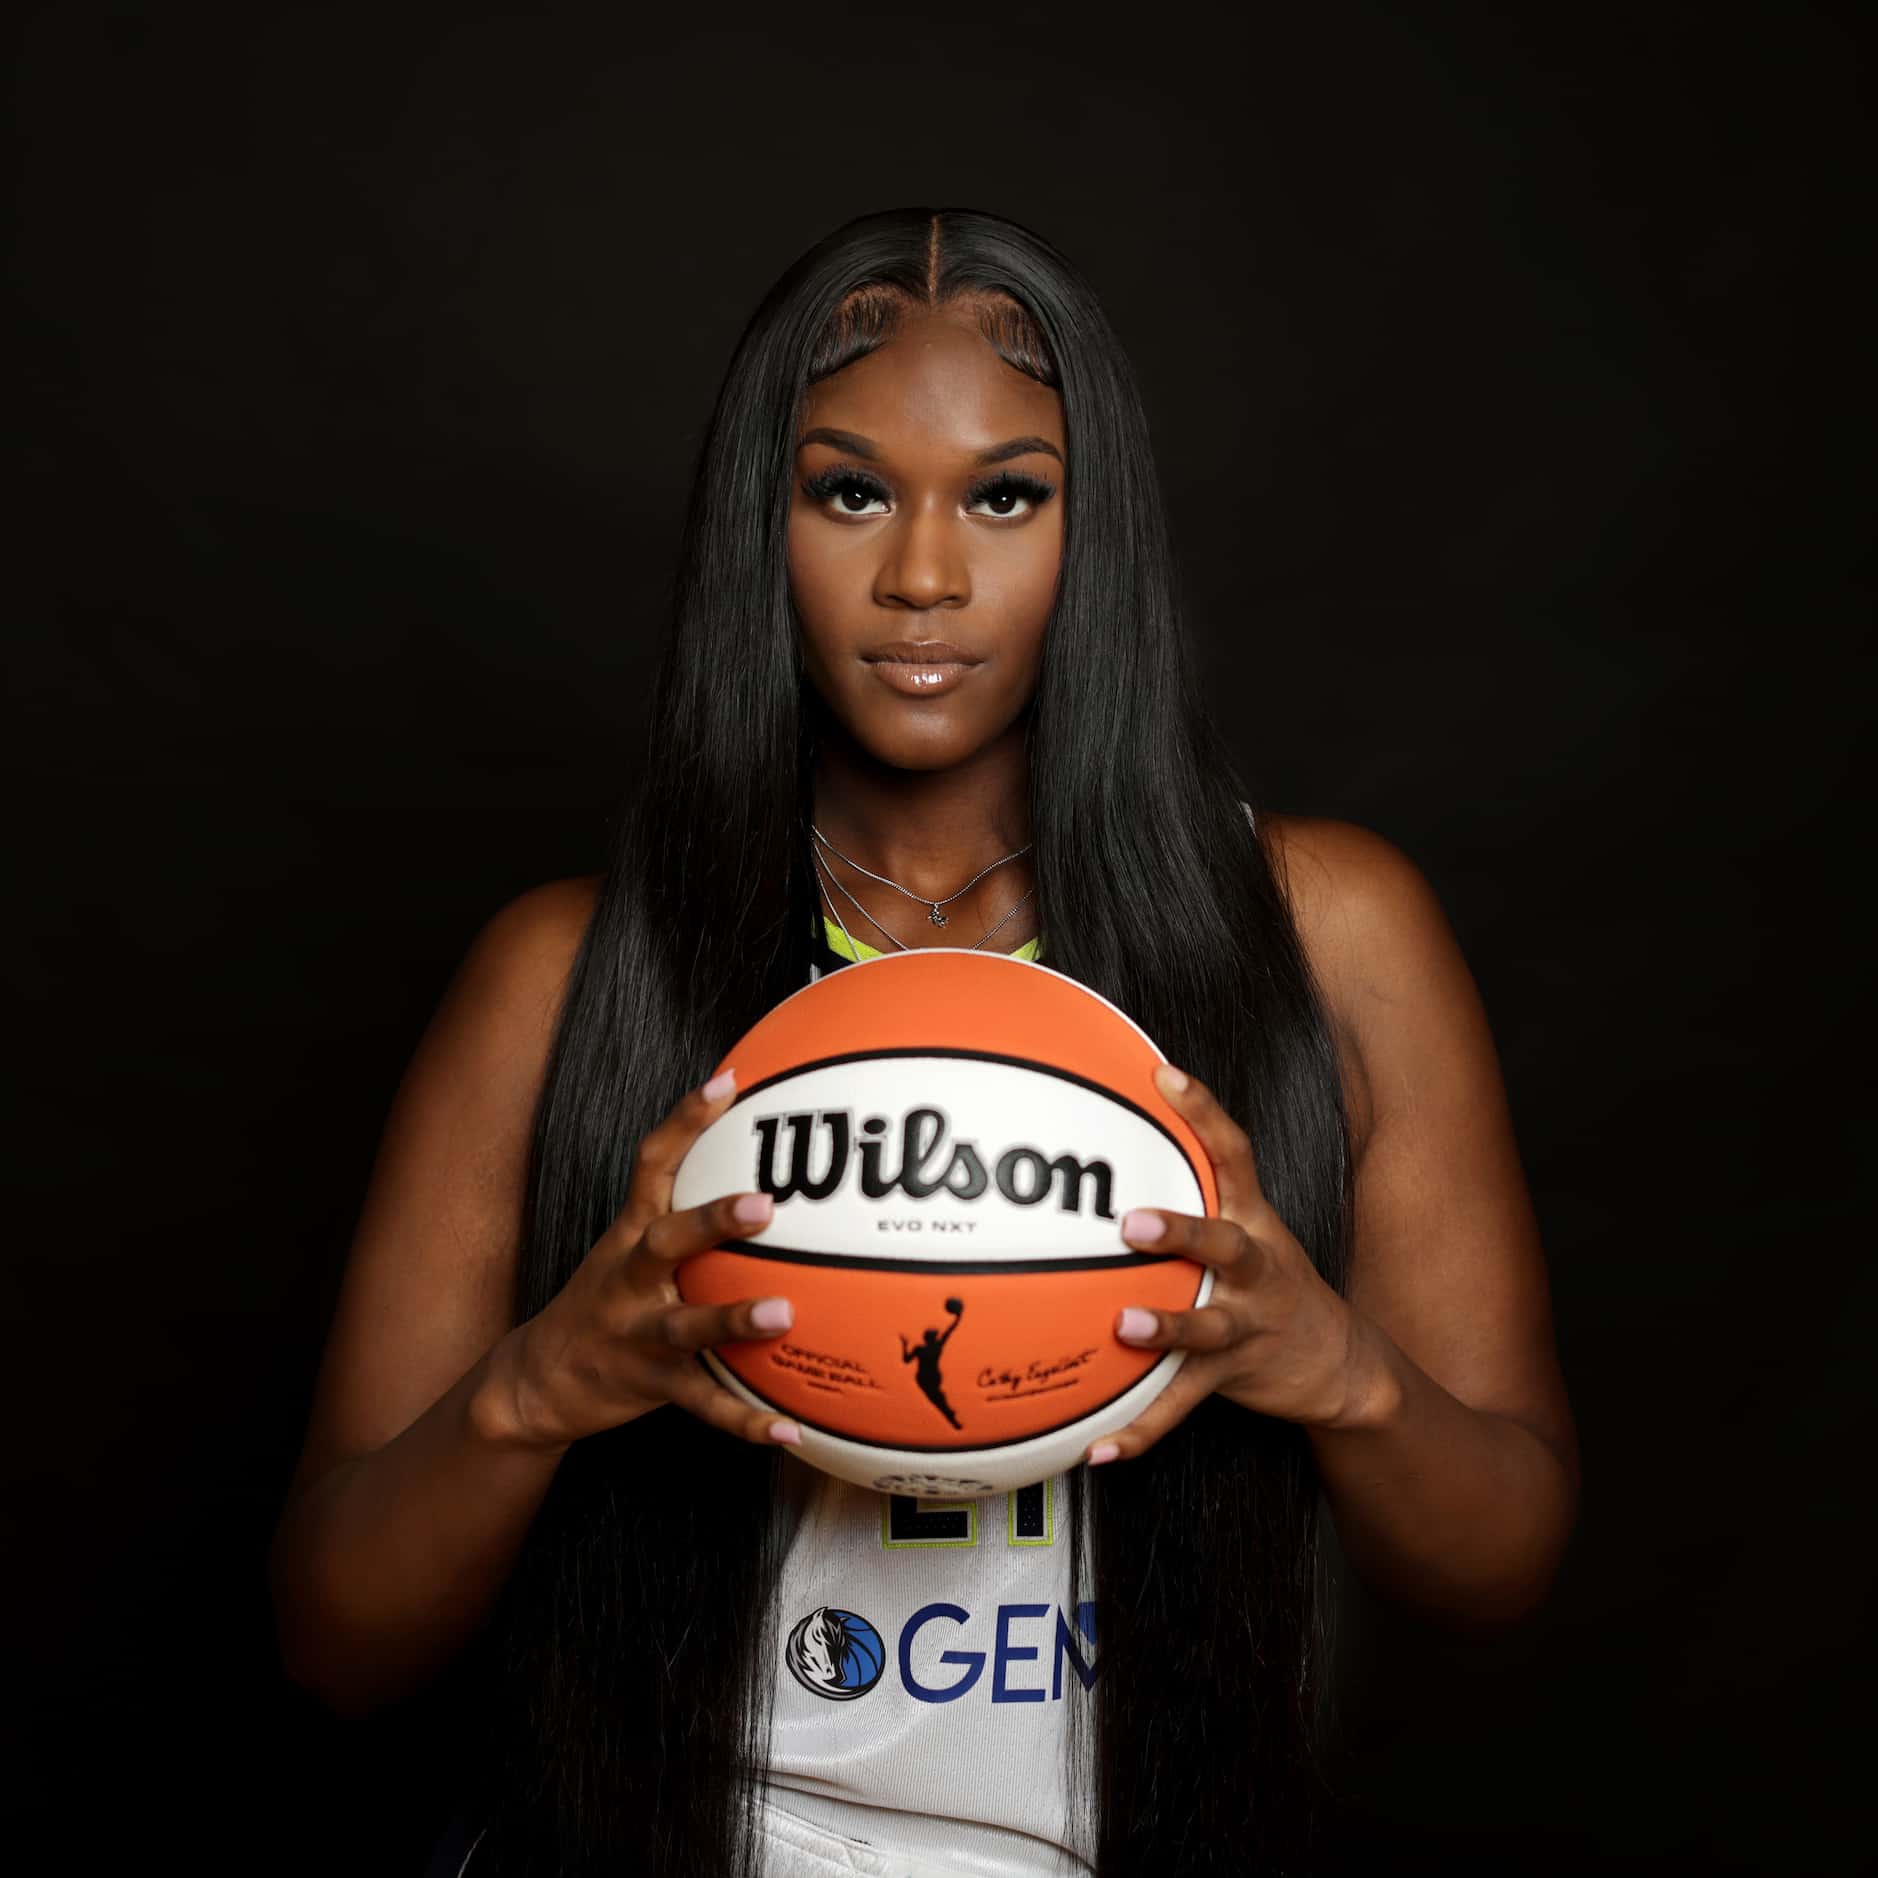 #21 Kalani Brown with The Dallas Wings poses for a photograph at College Park Center in...